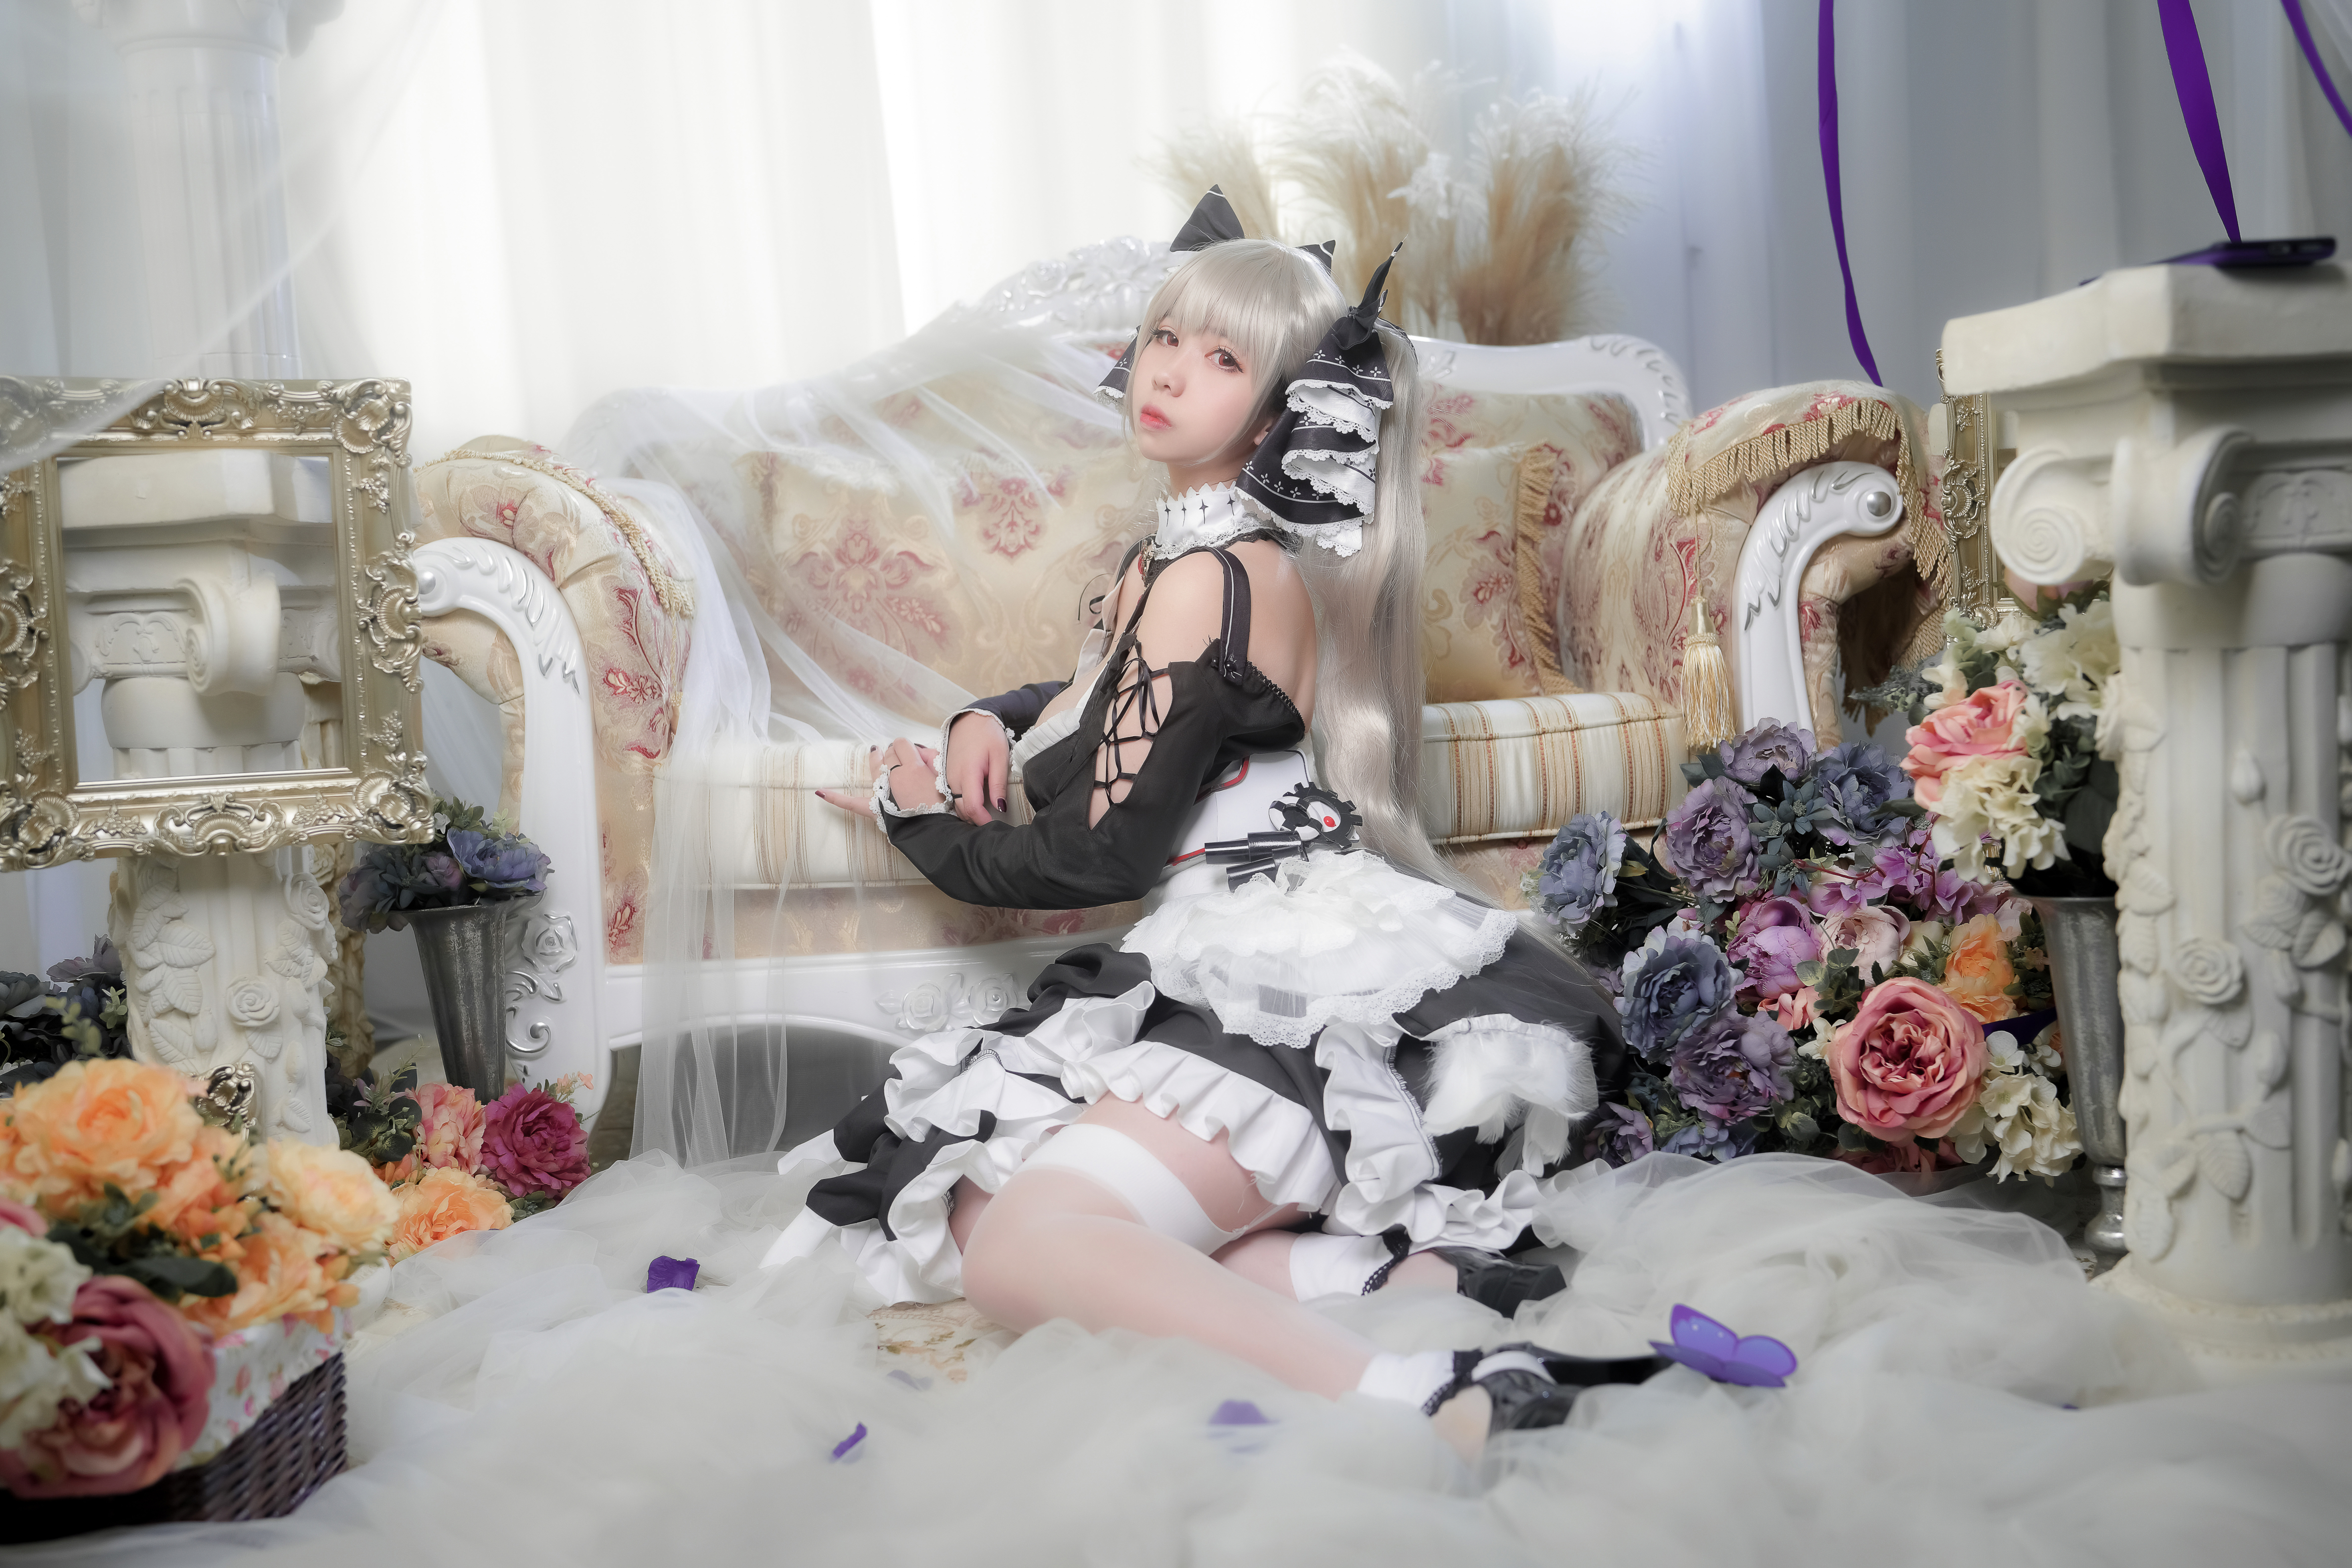 Women Model Asian Cosplay Formidable Azur Lane Azur Lane Video Games Maid Maid Outfit Women Indoors  5000x3333